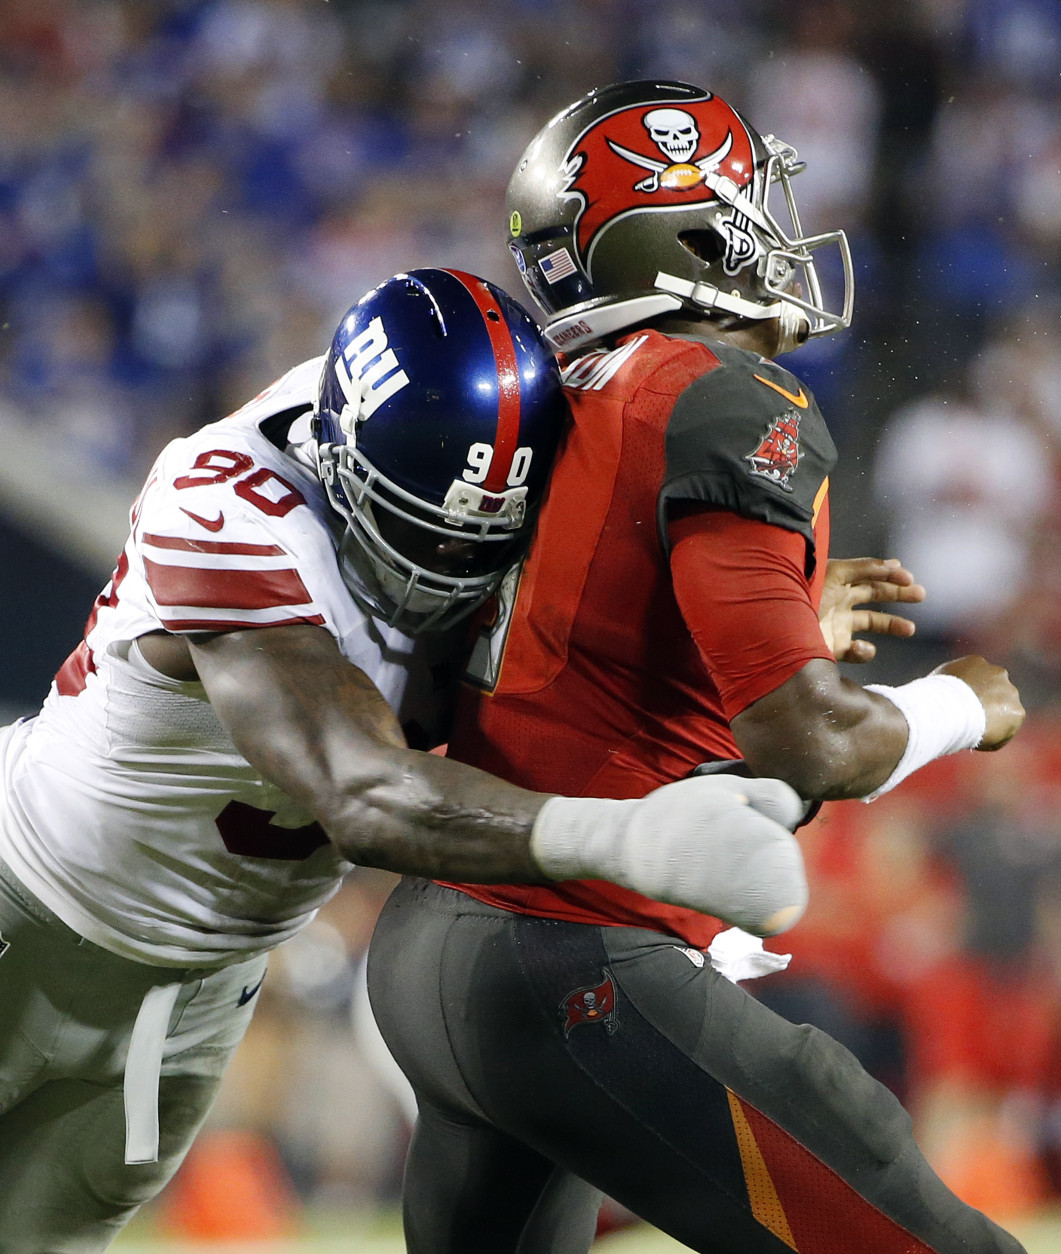 New York Giants defensive end Jason Pierre-Paul (90) hits Tampa Bay Buccaneers quarterback Jameis Winston (3) after a pass attempt during the fourth quarter of an NFL football game Sunday, Nov. 8, 2015, in Tampa, Fla. (AP Photo/Brian Blanco)